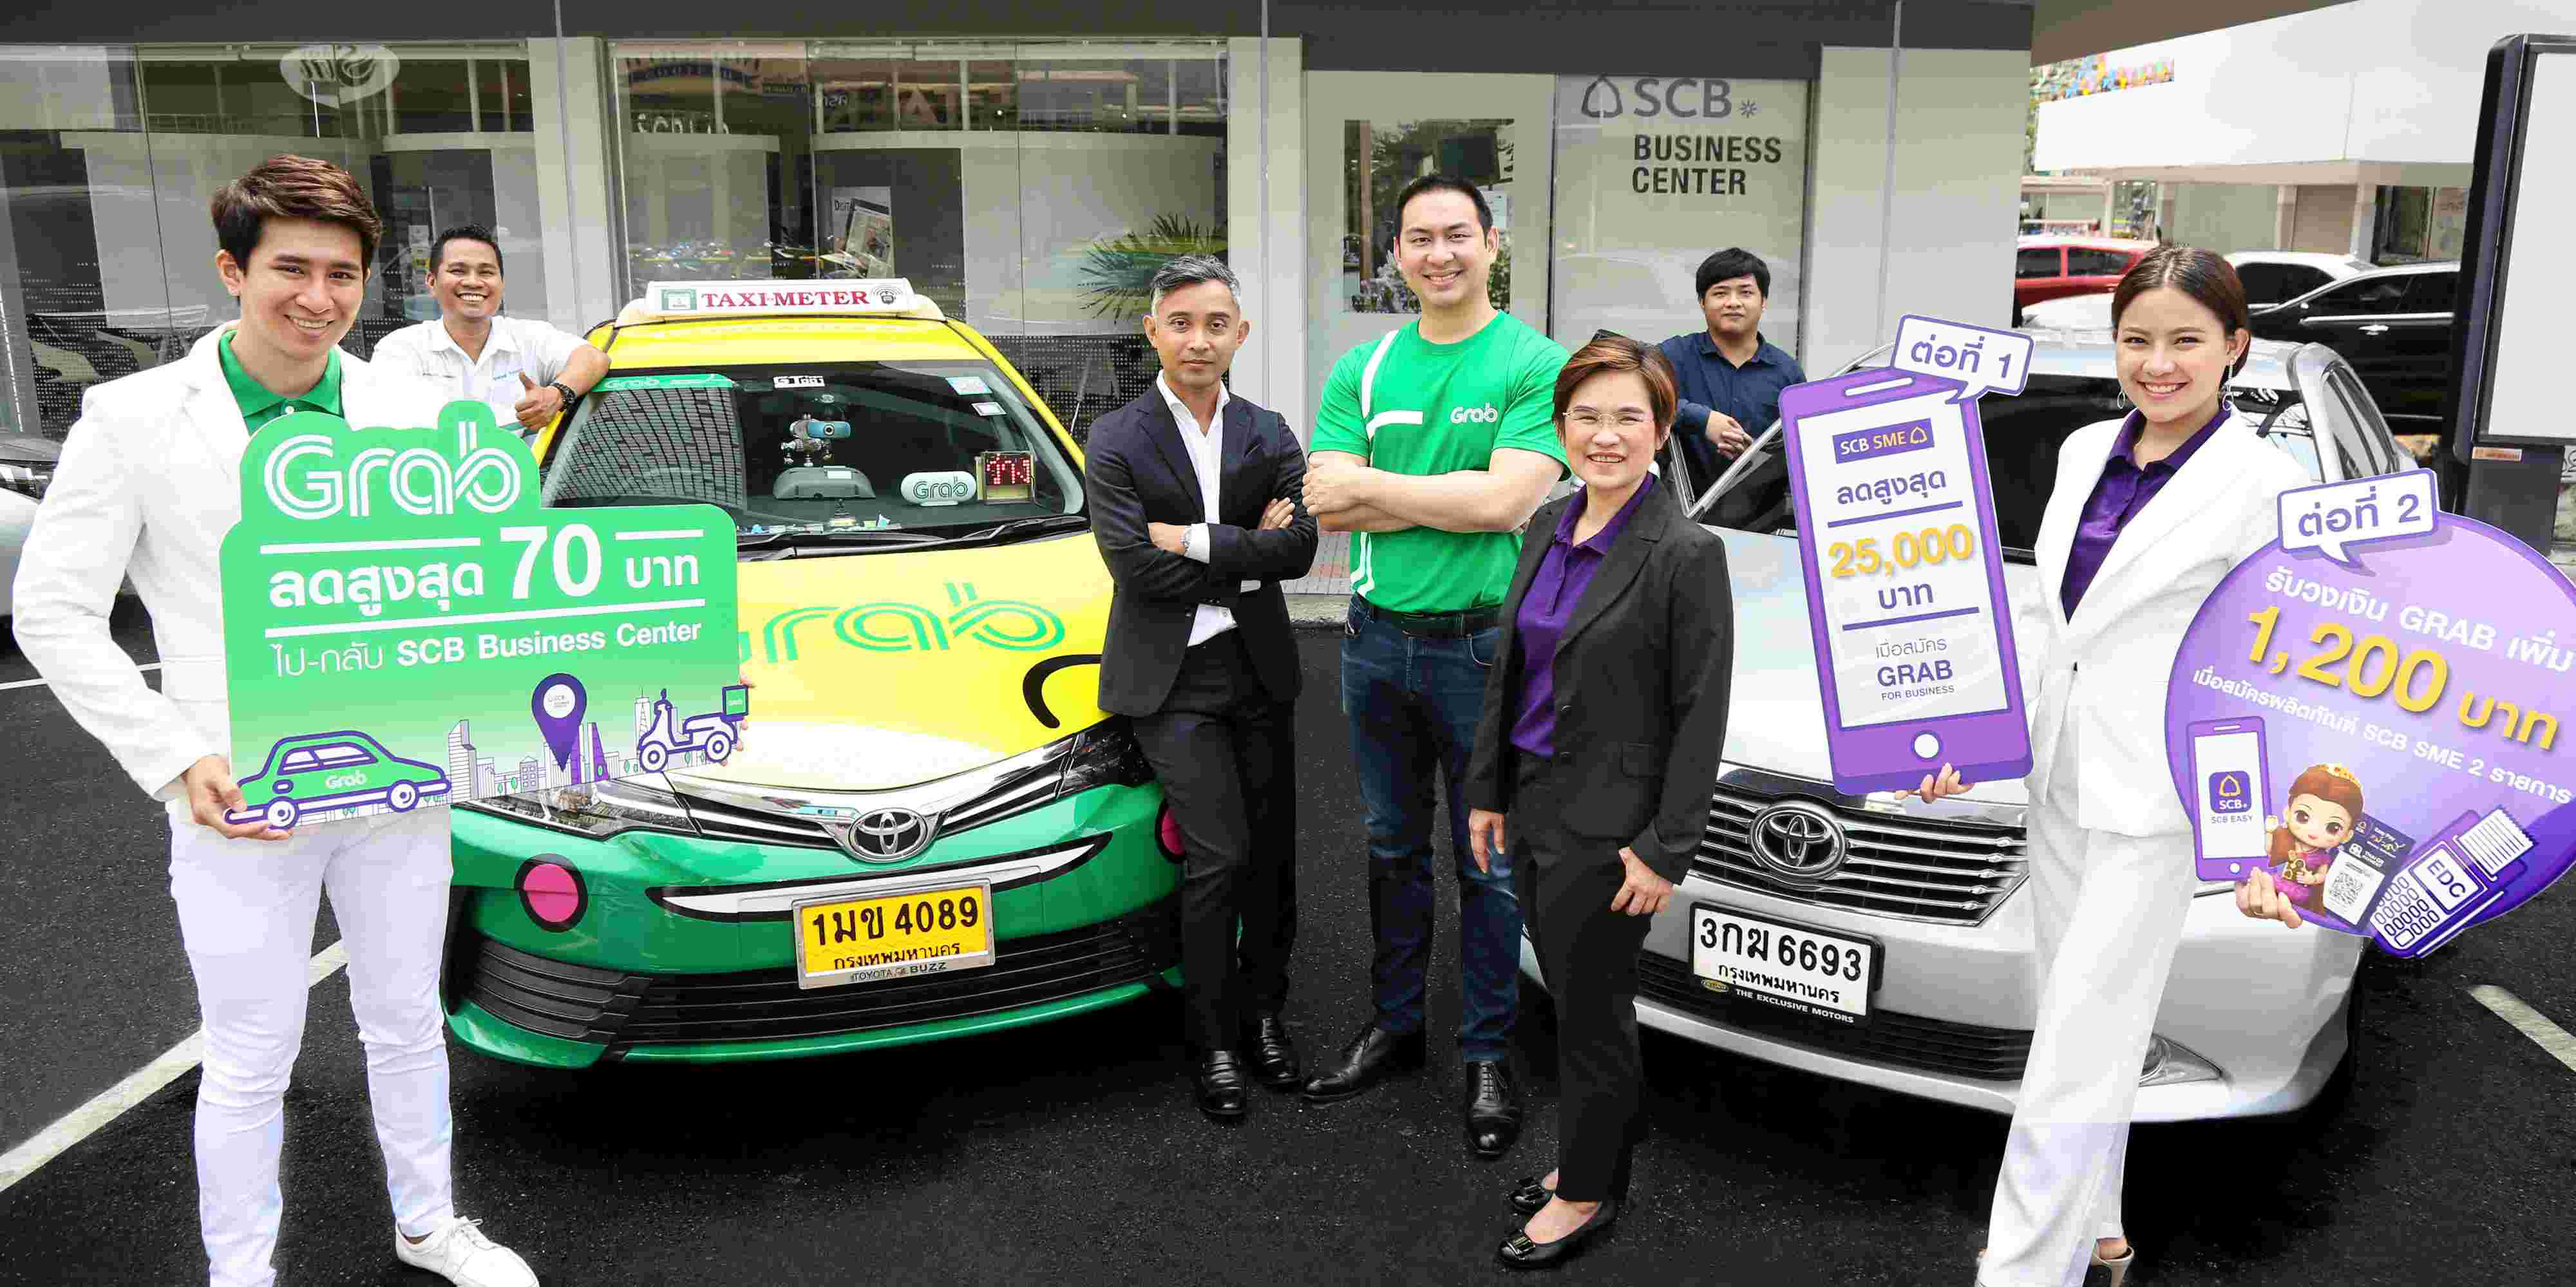  Grab  and SCB join forces to help SMEs entrepreneurs 